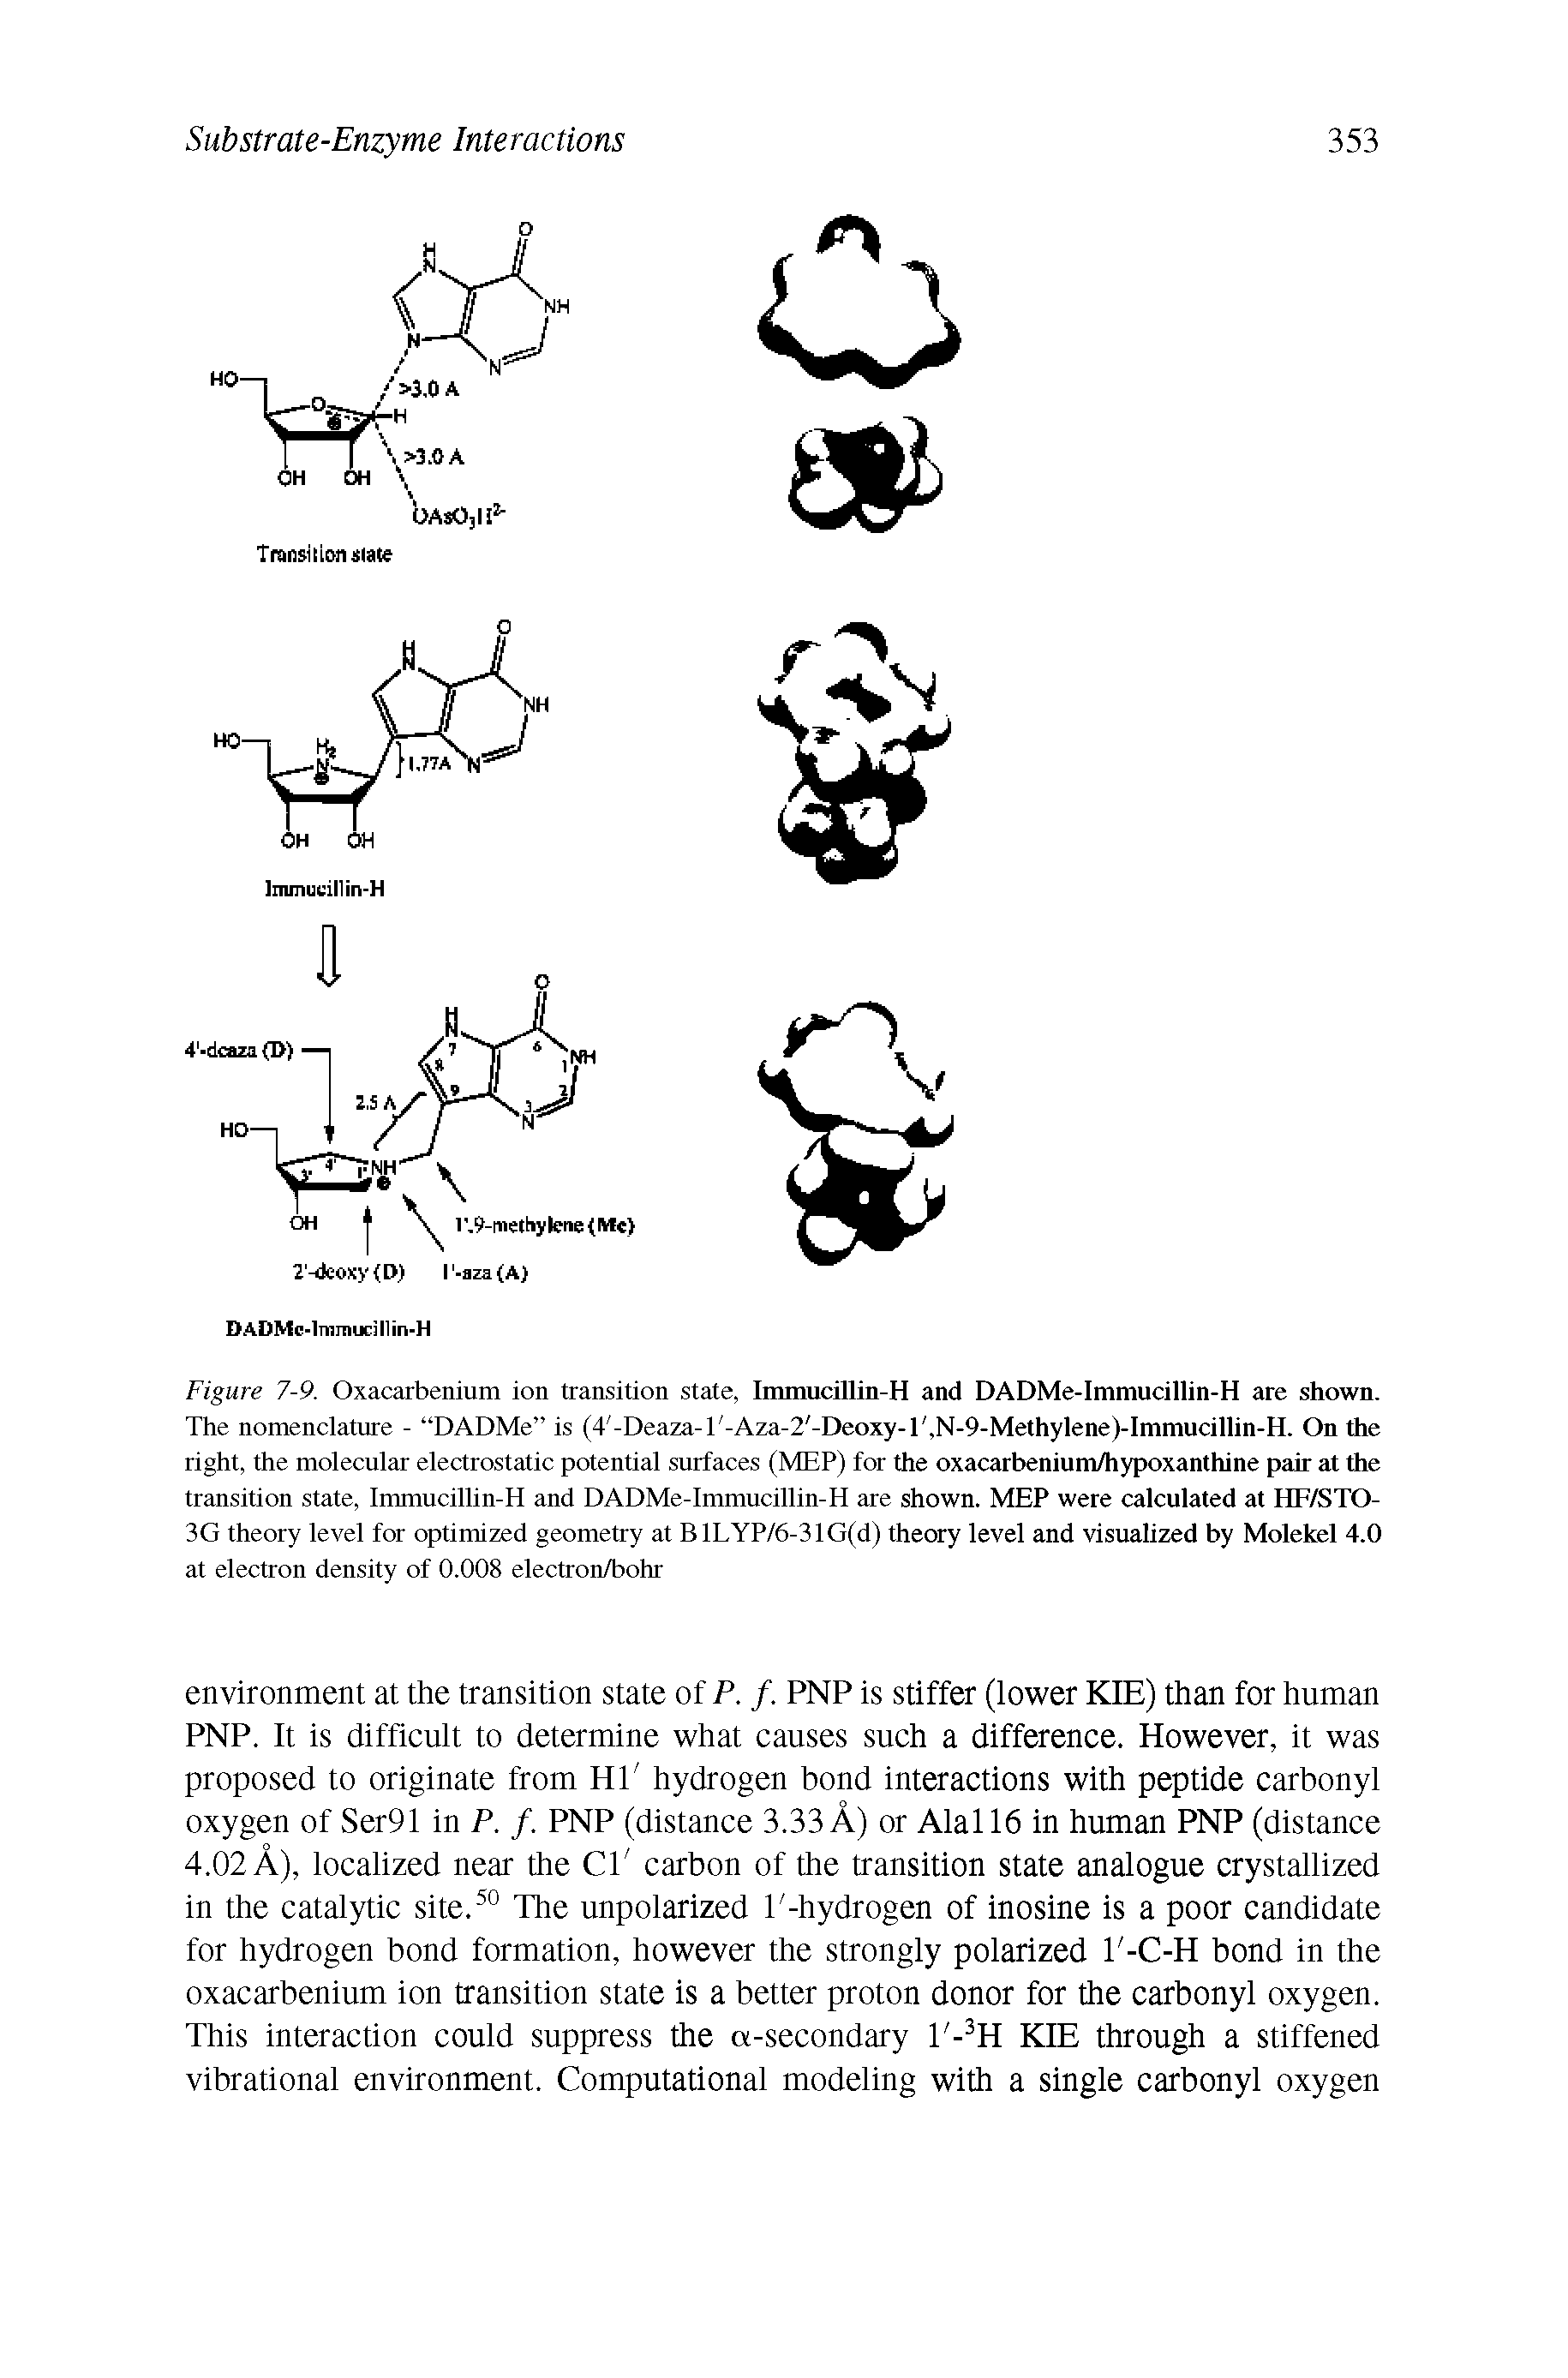 Figure 7-9. Oxacarbenium ion transition state, Immucillin-H and DADMe-Immucillin-H are shown. The nomenclature - DADMe is (4 -Deaza-l -Aza-2/-Deoxy-l/,N-9-Methylene)-Immucillin-H. On die right, the molecular electrostatic potential surfaces (MEP) for the oxacarbenium/hypoxanthine pair at die transition state, Immucillin-H and DADMe-Immucillin-H are shown. MEP were calculated at HF/STO-3G theory level for optimized geometry at BlLYP/6-31G(d) theory level and visualized by Molekel 4.0 at electron density of 0.008 electron/bohr...